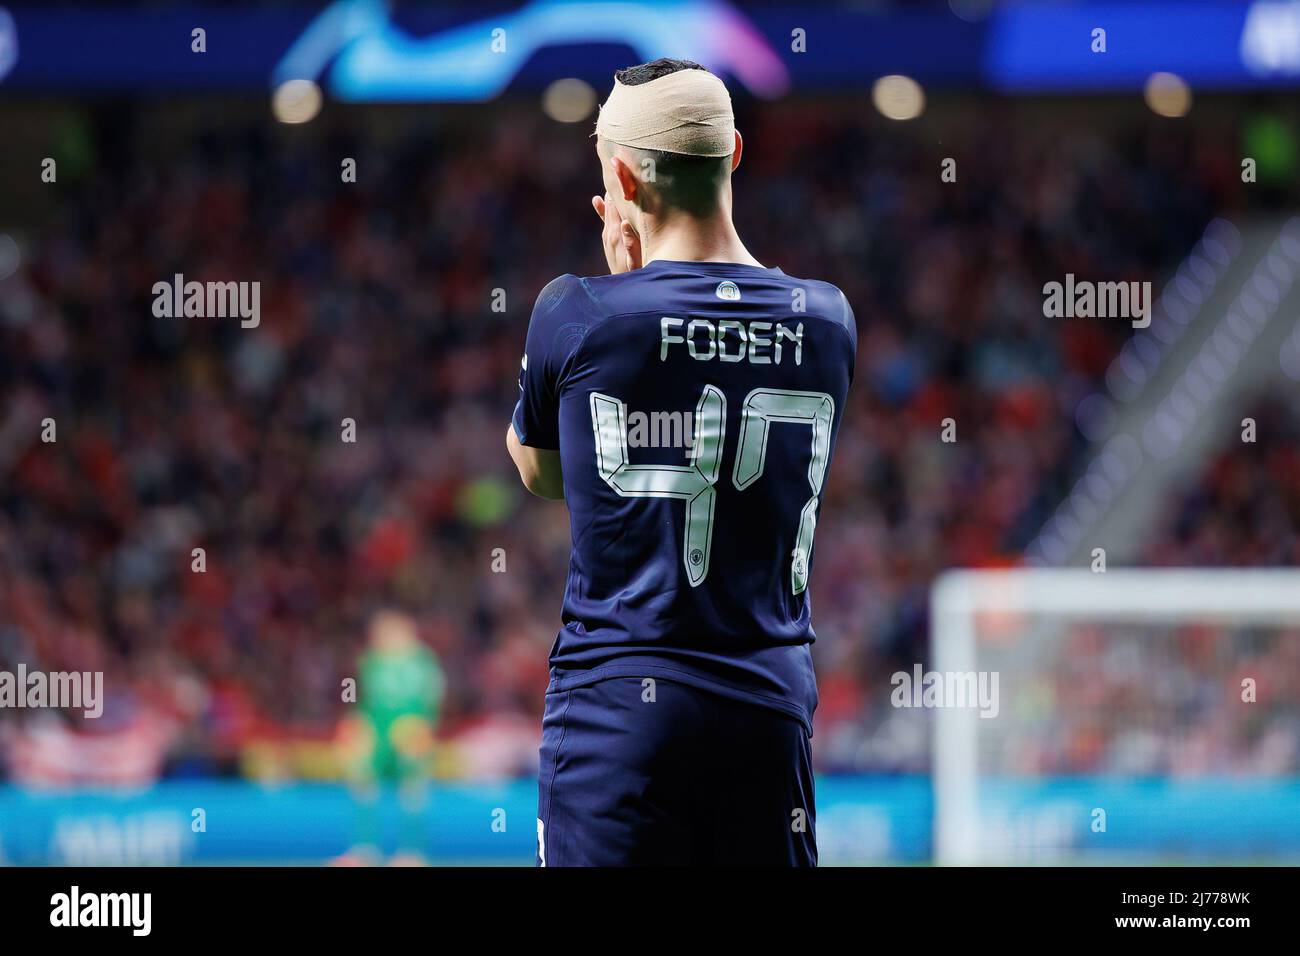 MADRID - APR 13: Phil Foden in action during the Champions League match between Club Atletico de Madrid and Manchester City at the Metropolitano Stadi Stock Photo